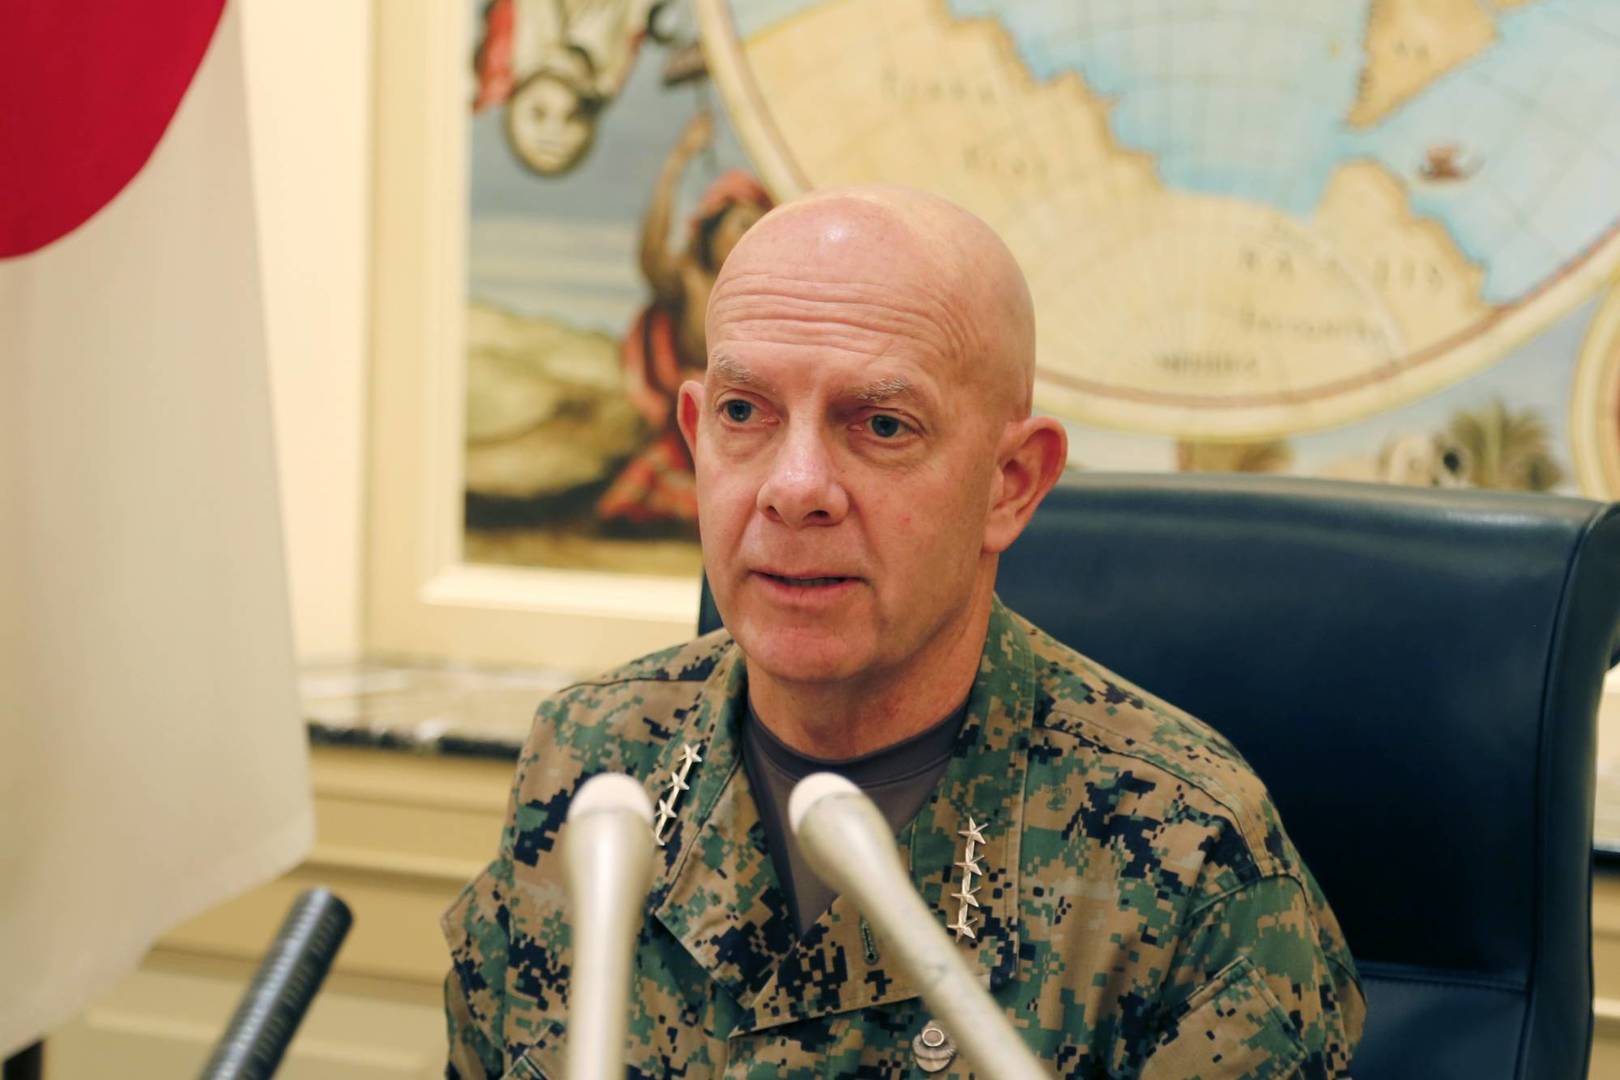 Gen. David Berger, the new U.S. Marines commandant, speaks during a press conference in Tokyo, Wednesday, Aug. 21, 2019. Berger said he is concerned about deteriorating relations between Japan and South Korea, both key regional allies. Berger told reporters that Japan and Korea have common interests despite their differences, such as the threat posed by China, and he hoped politicians will work out a resolution. (AP Photo/Yuri Kageyama)